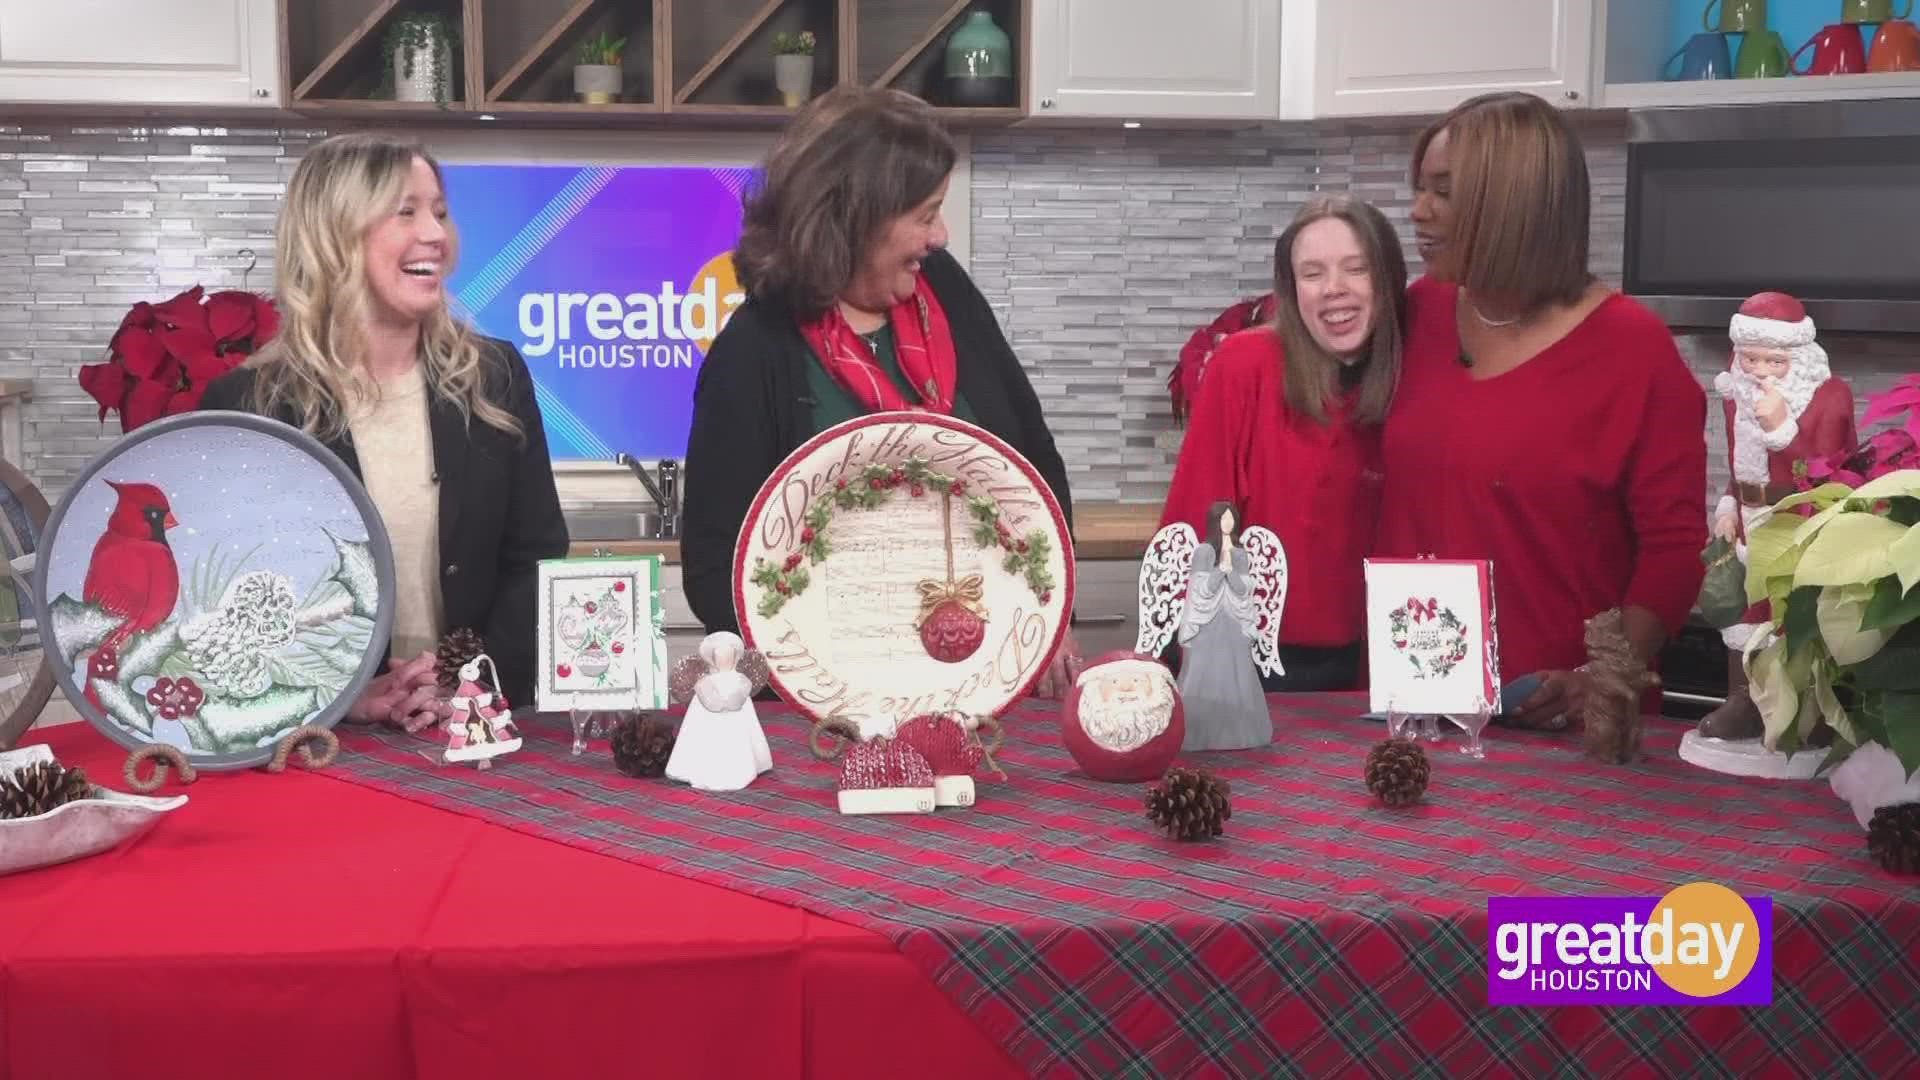 Vivian Shudde, Ashtyn Hooper, and Michelle Wilde discuss why Brookwood is a great place to get beautiful, handmade gifts for friends and loved ones.